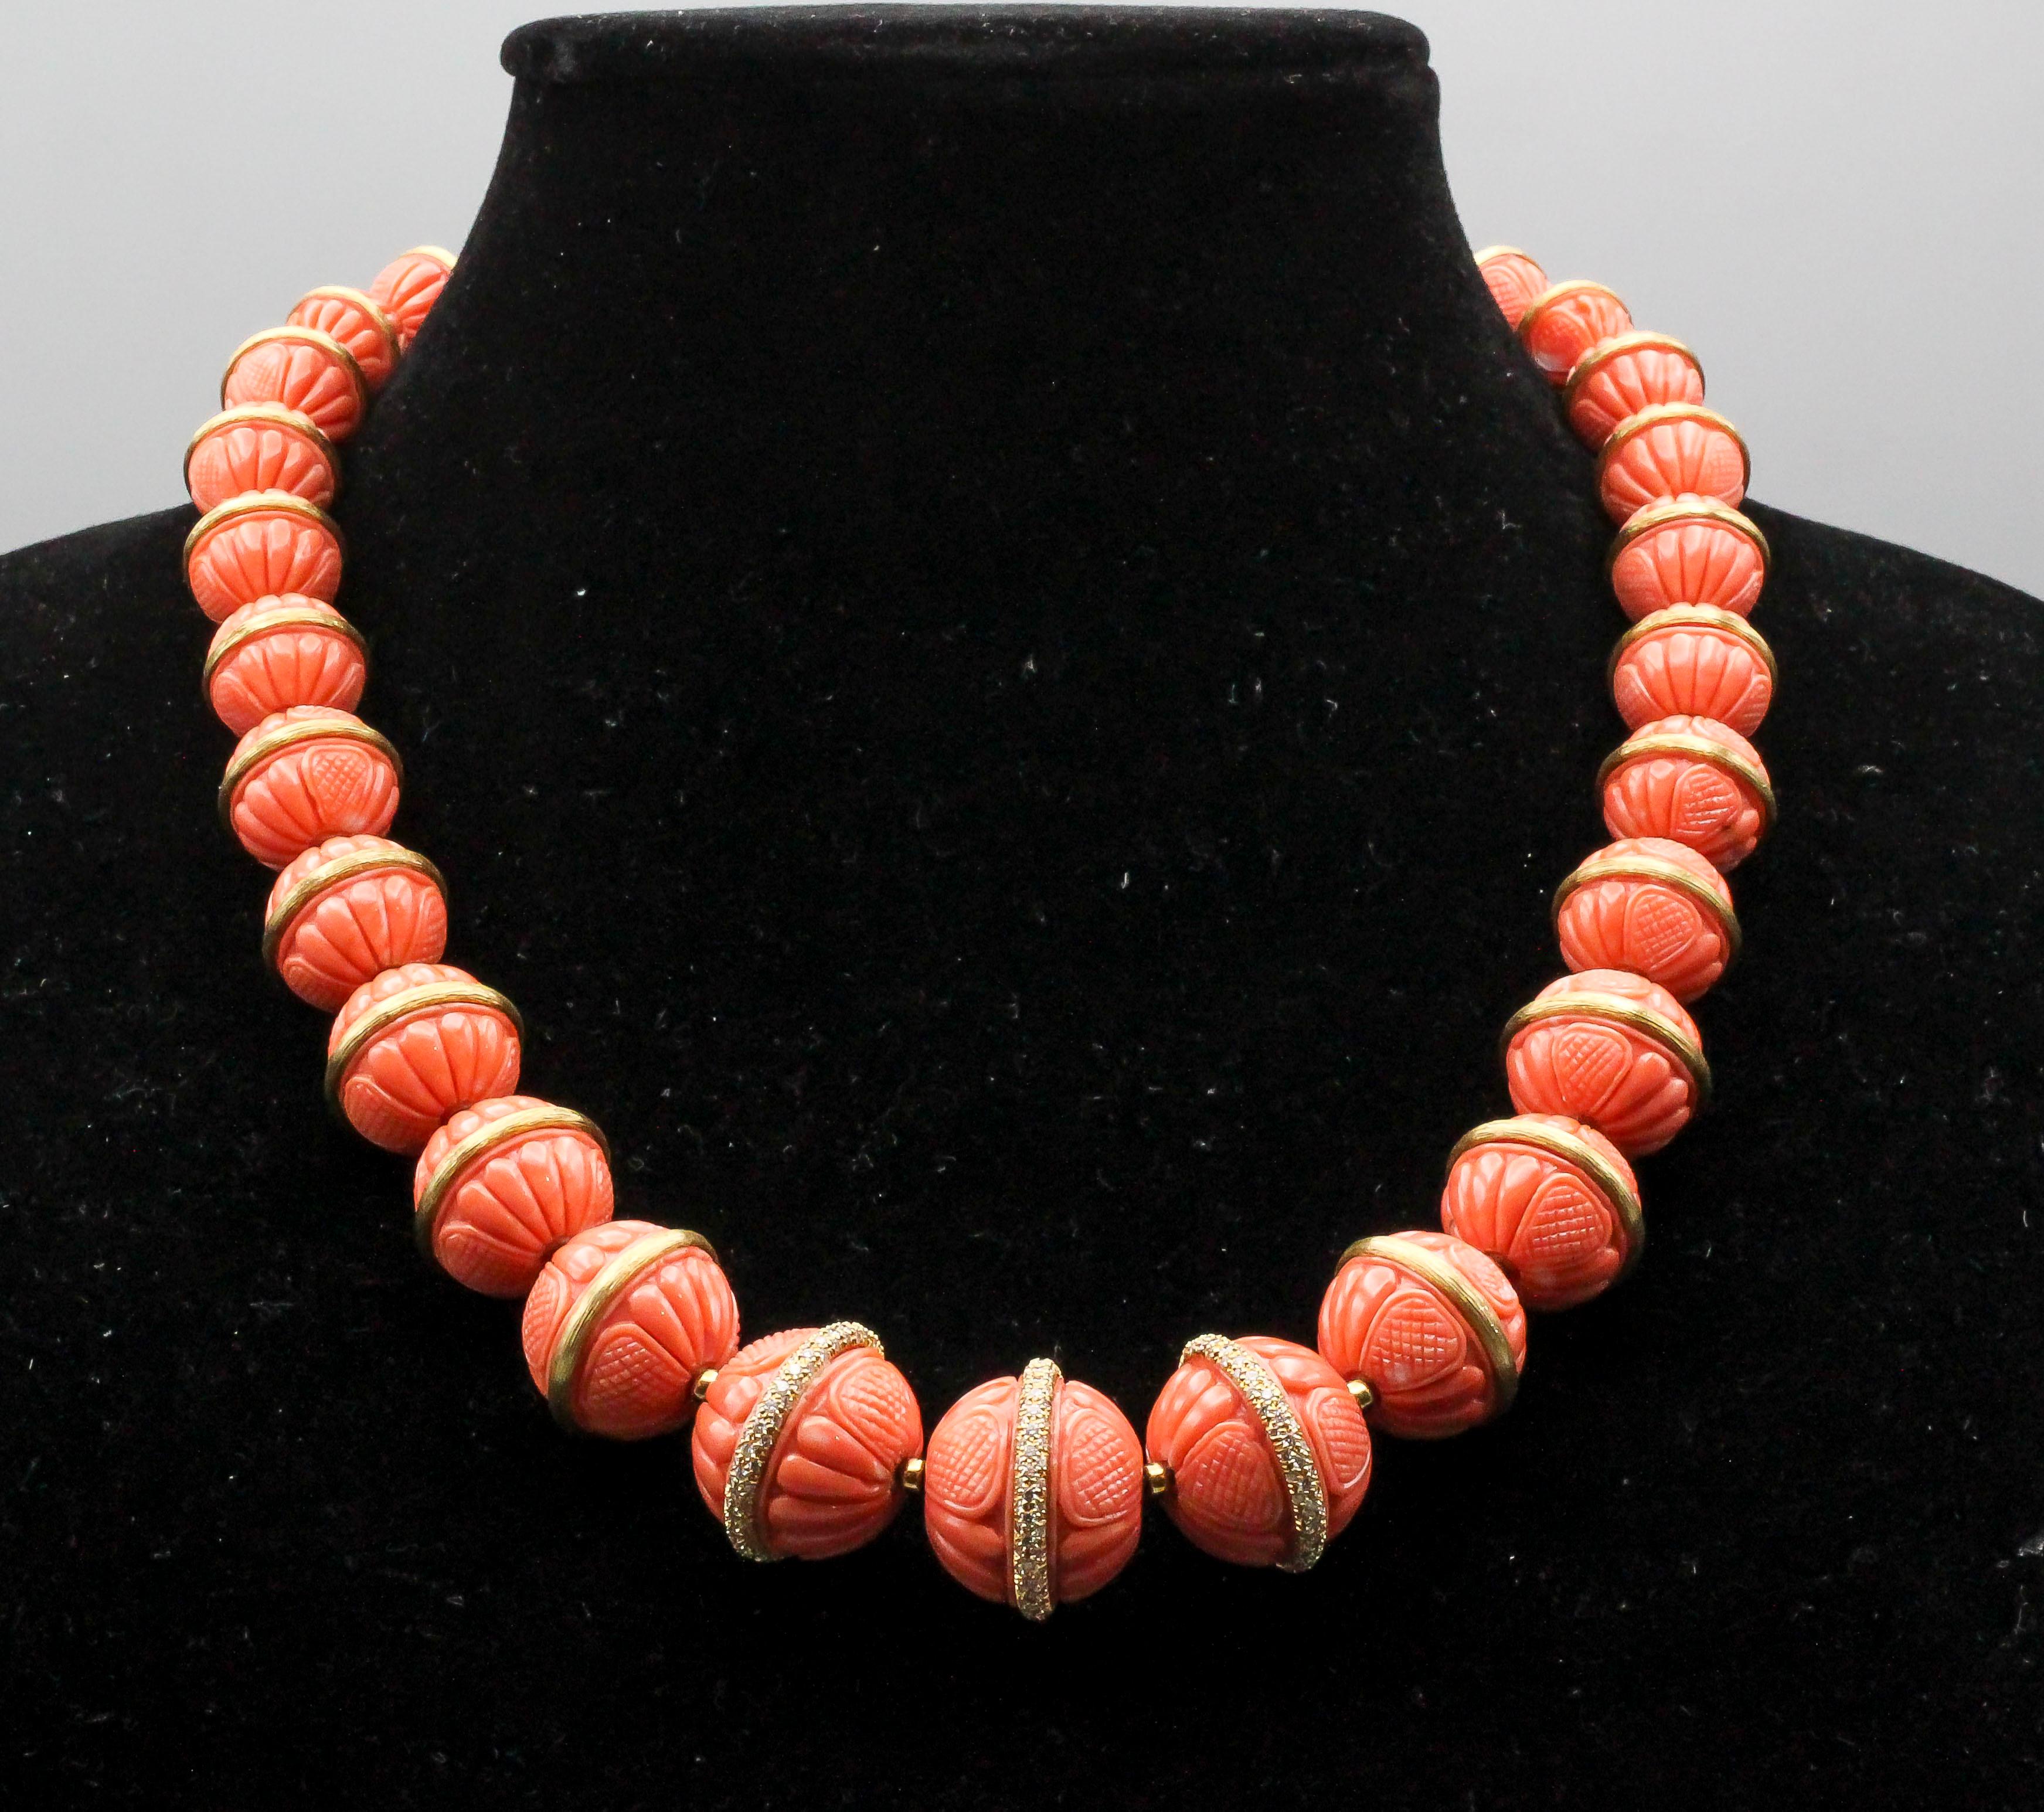 Impressive coral, diamond and 18K yellow gold necklace and bracelet suite by Henry Dunay. The coral beads on necklace range in size from 11mm to 20mm in diameter; the bracelet corals measure 9mm to 11mm in diameter. The corals are a rich salmon